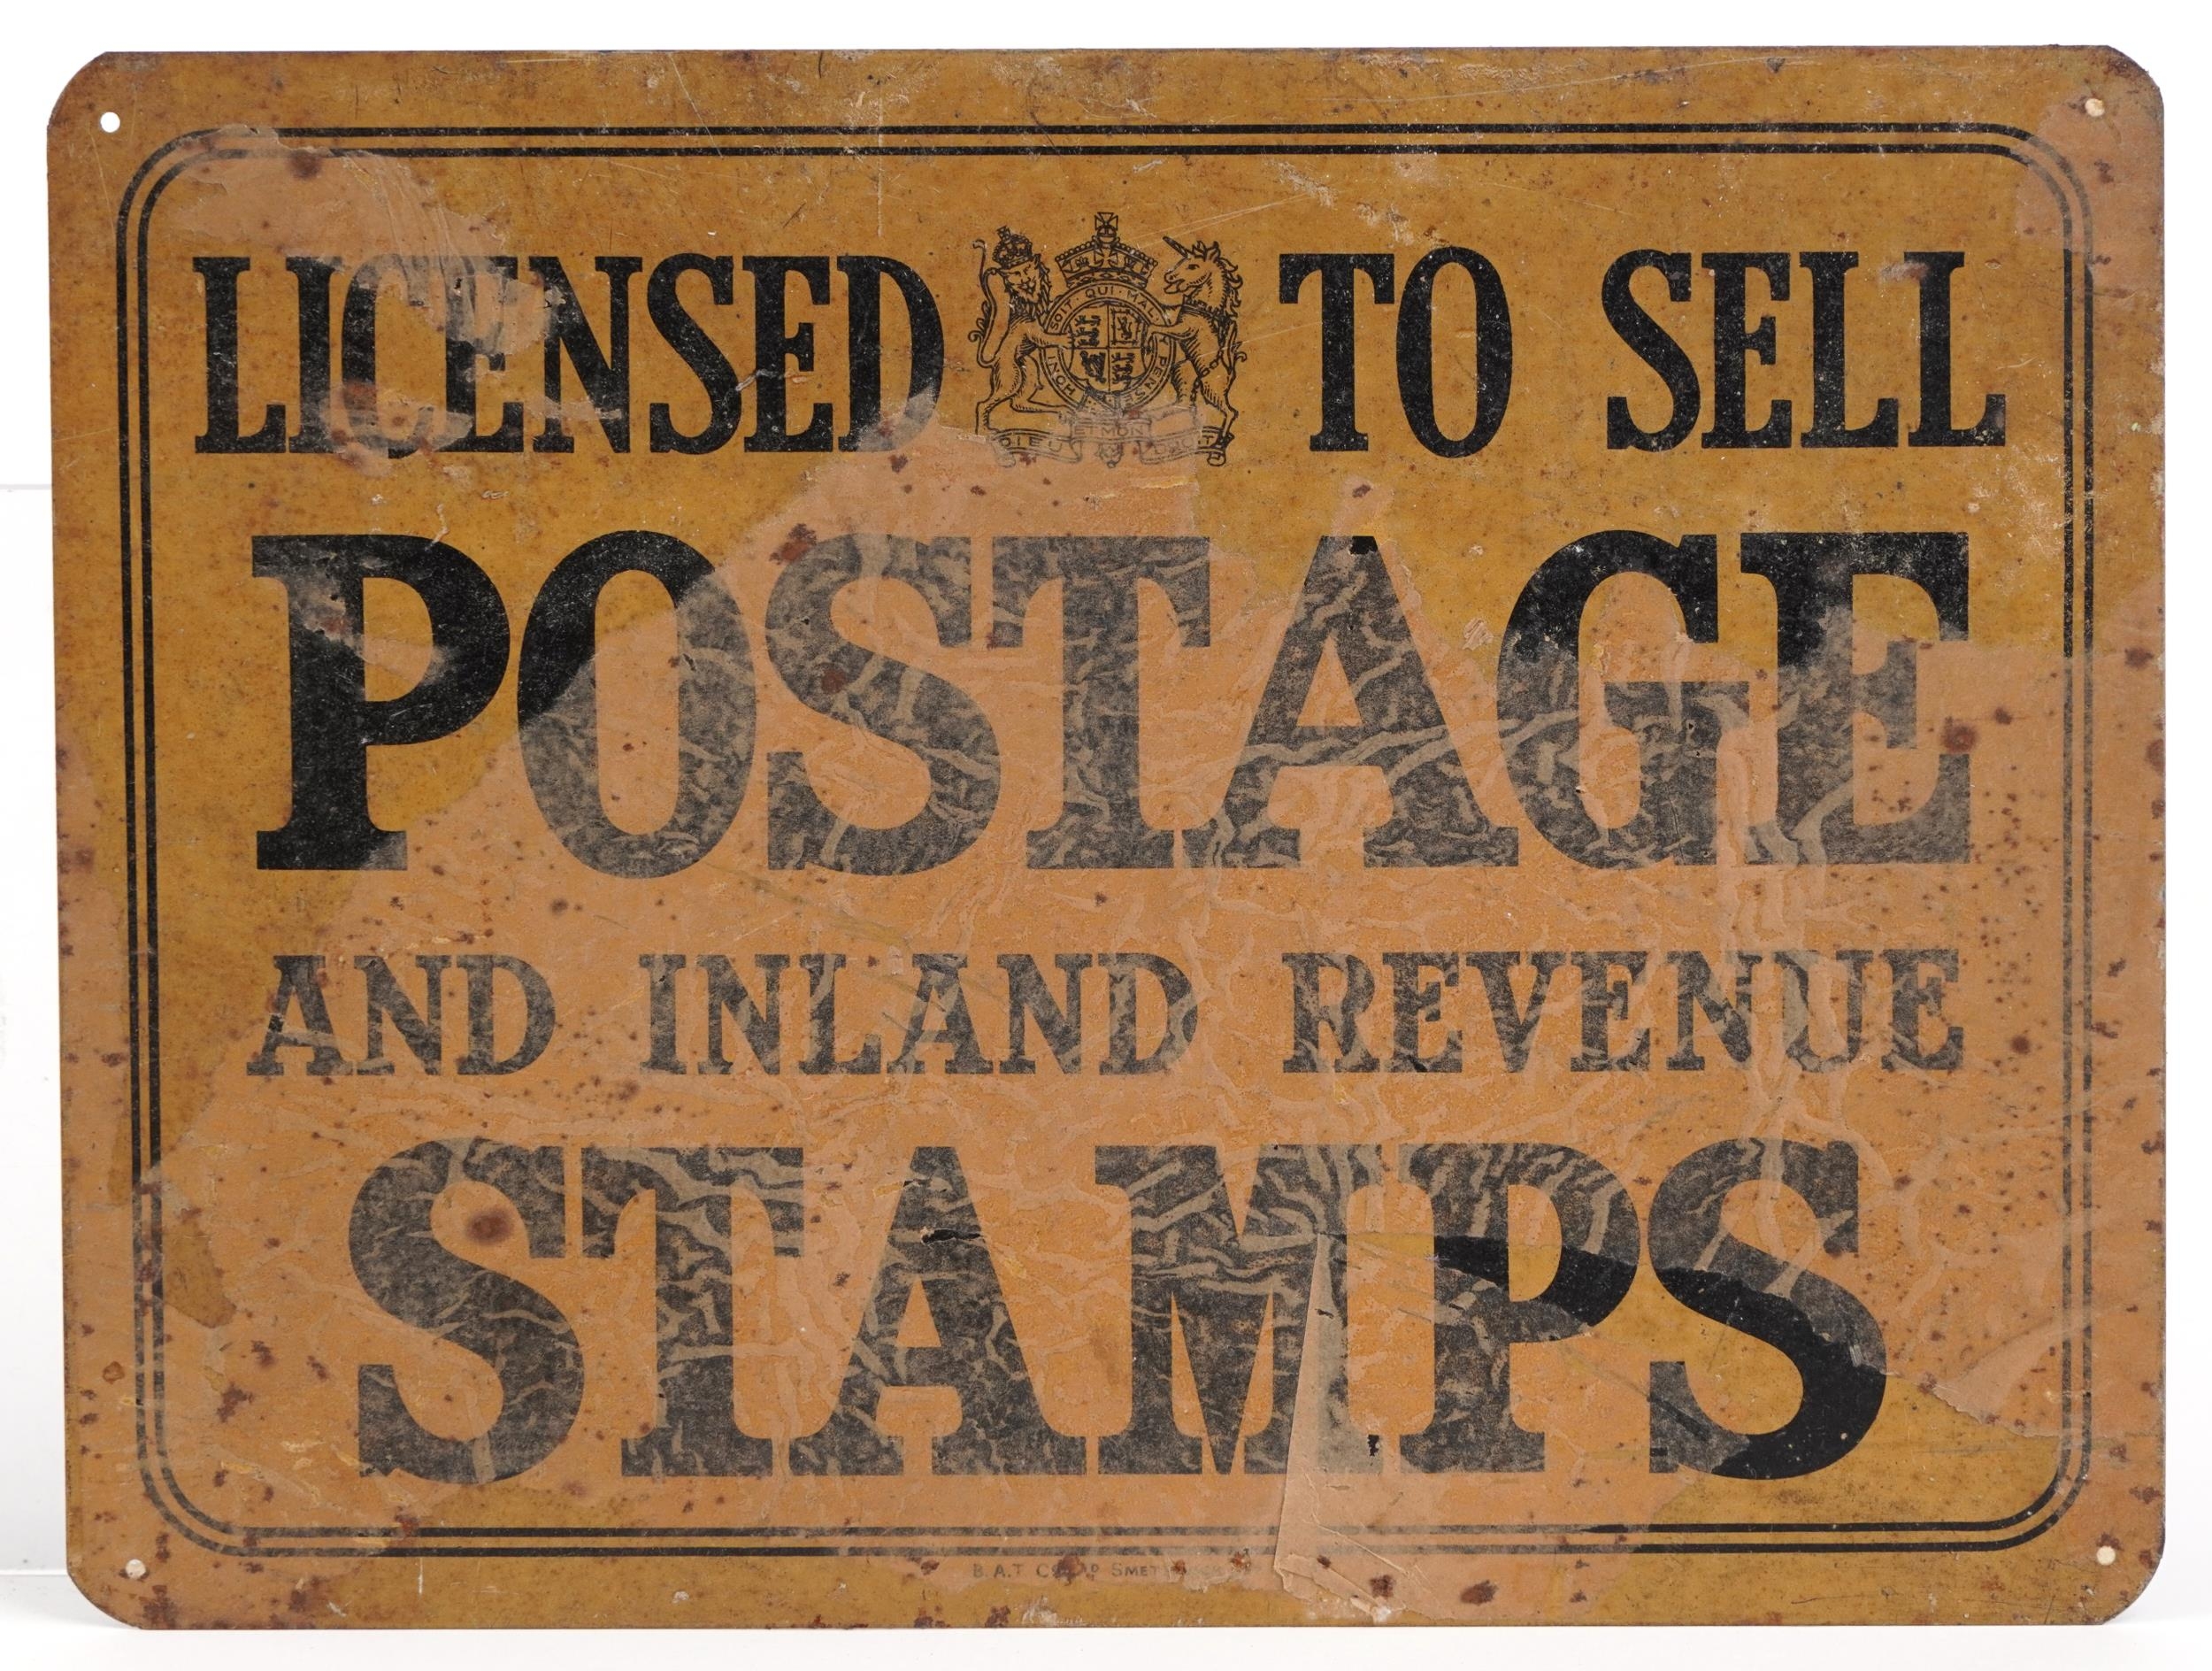 Vintage Licensed to Sell Postage and Inland Revenue Stamps advertising sign, 27.5cm x 21cm